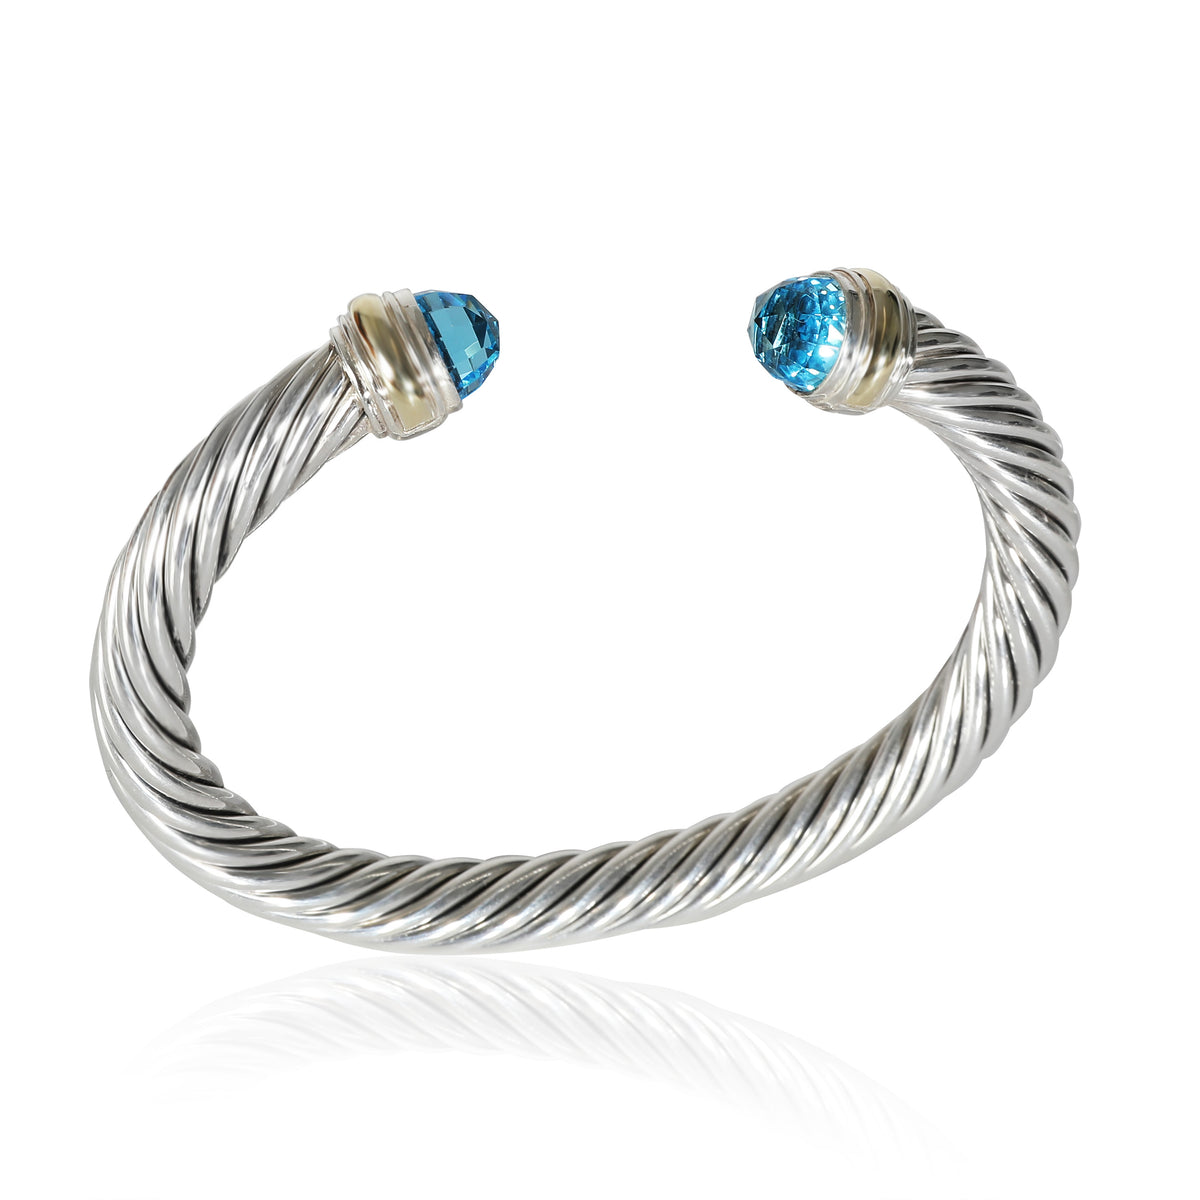 Cable Blue Topaz Bracelet in 14k Yellow Gold/Sterling Silver